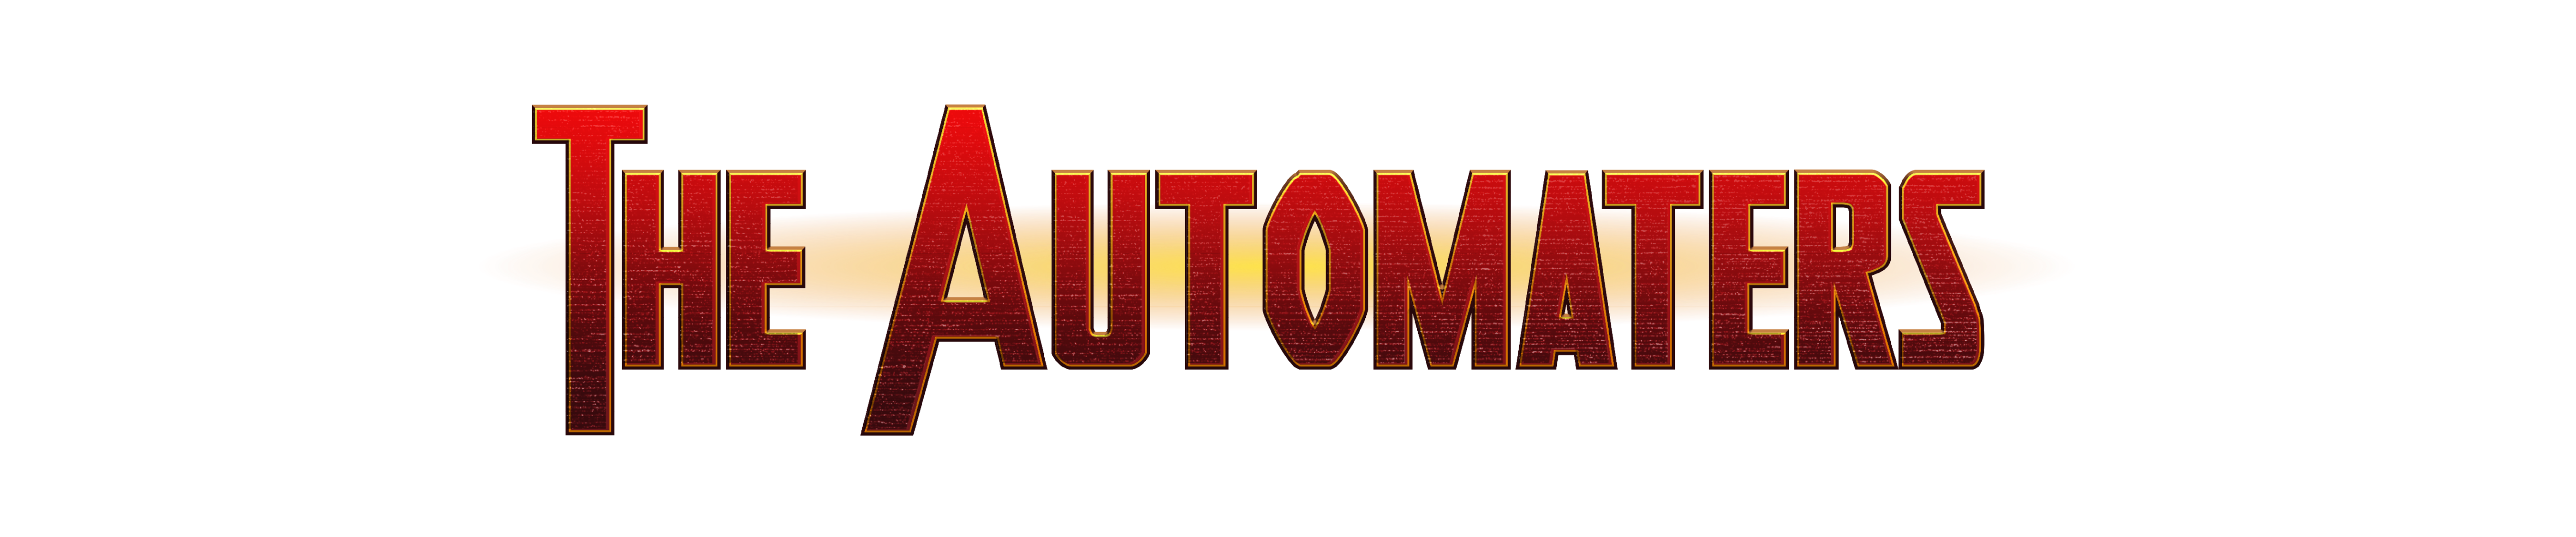 automaters logo